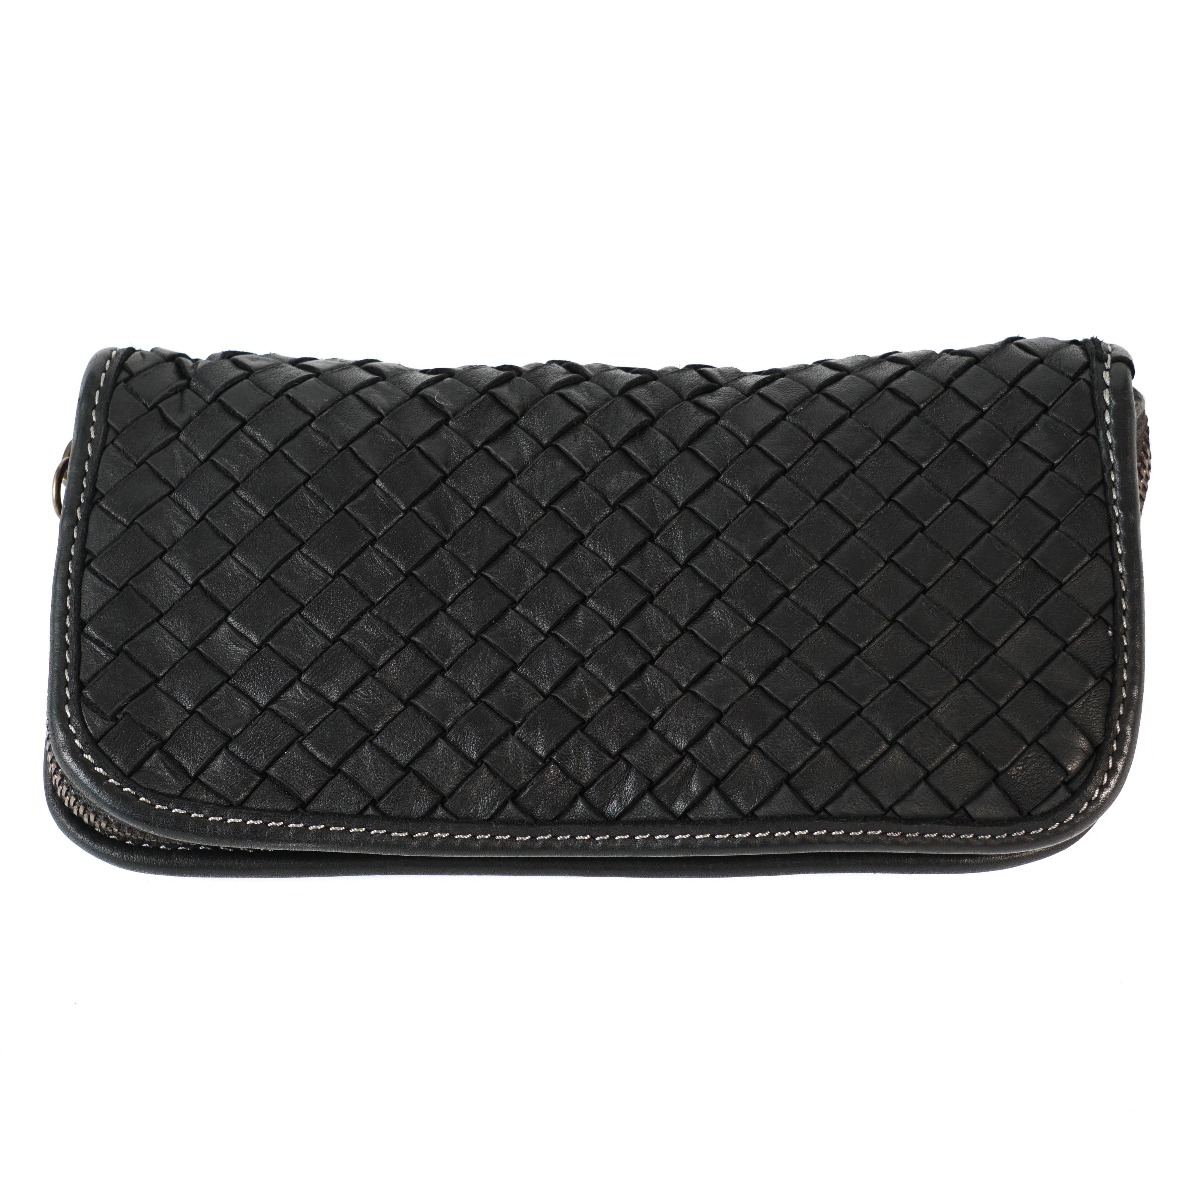 Woven leather wallet - black color